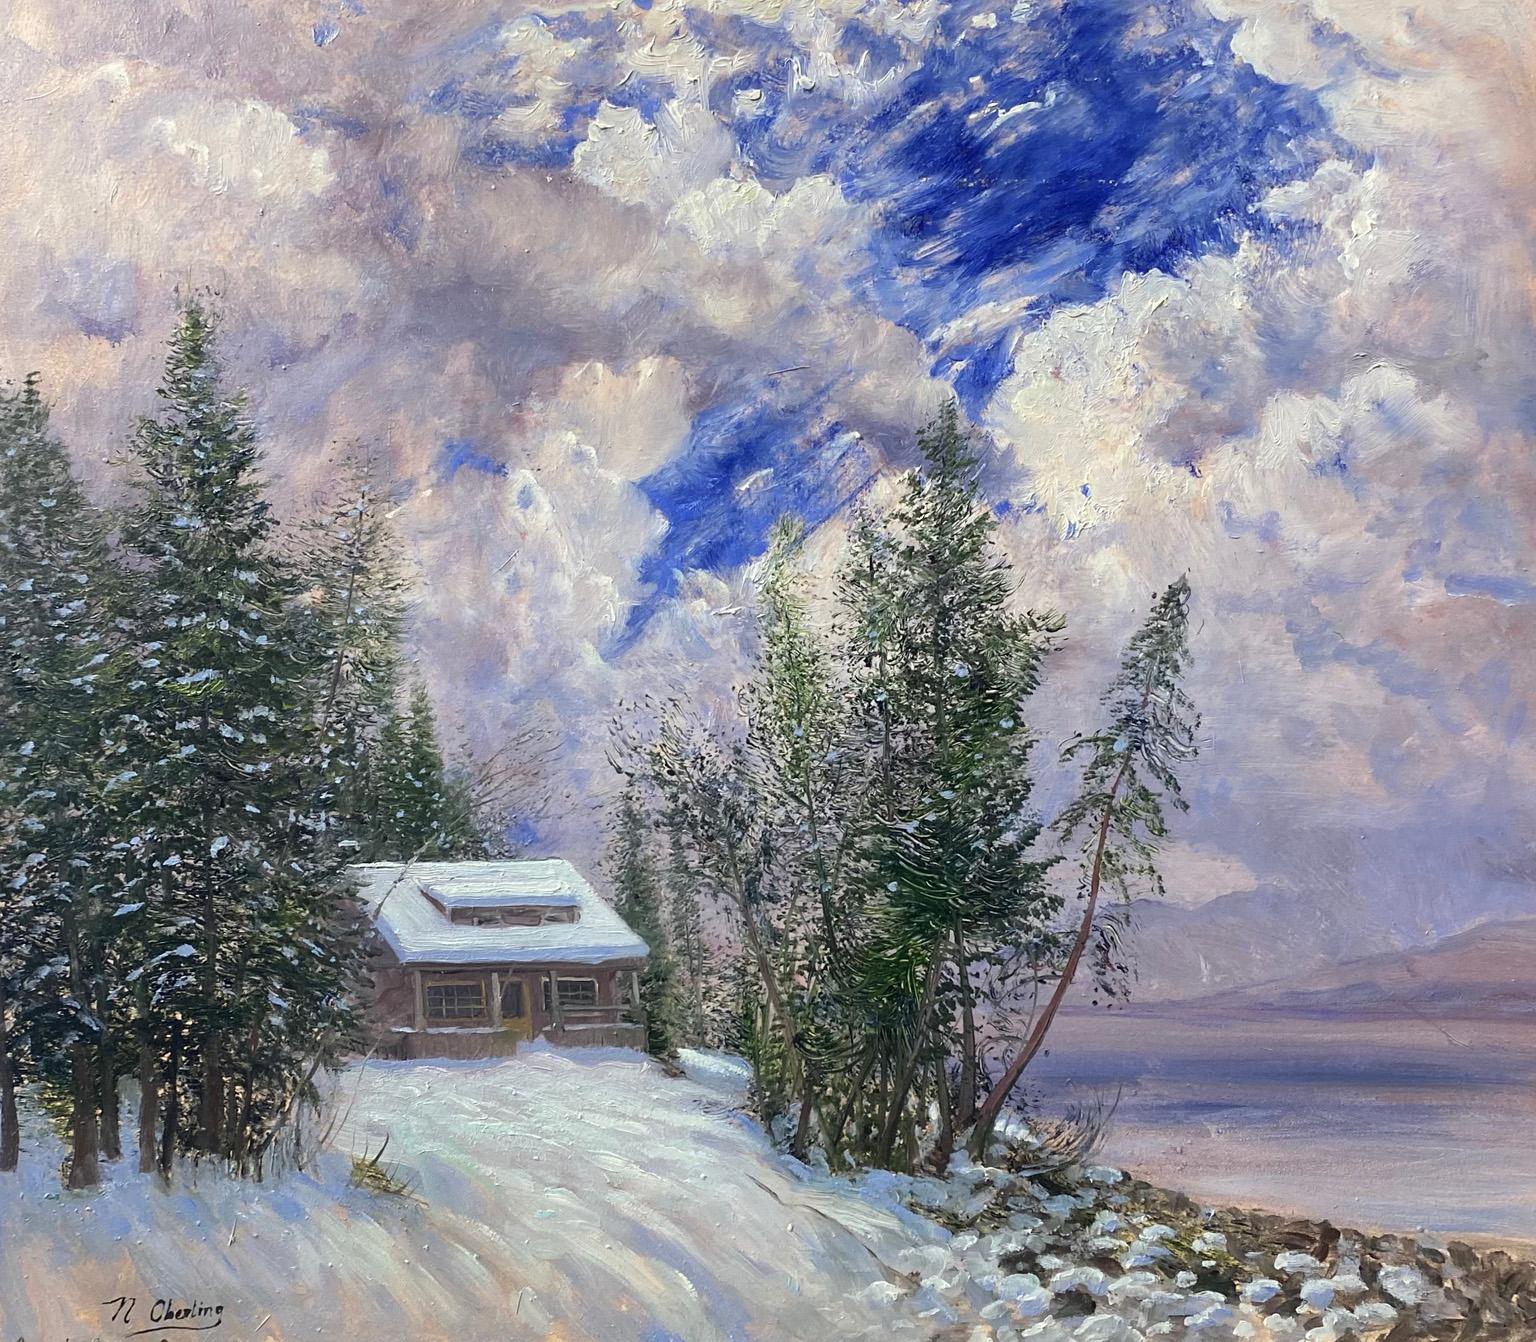 Nicholas Oberling Landscape Painting - Lake McDonald Cobb House During a Winter in Glacier National Park